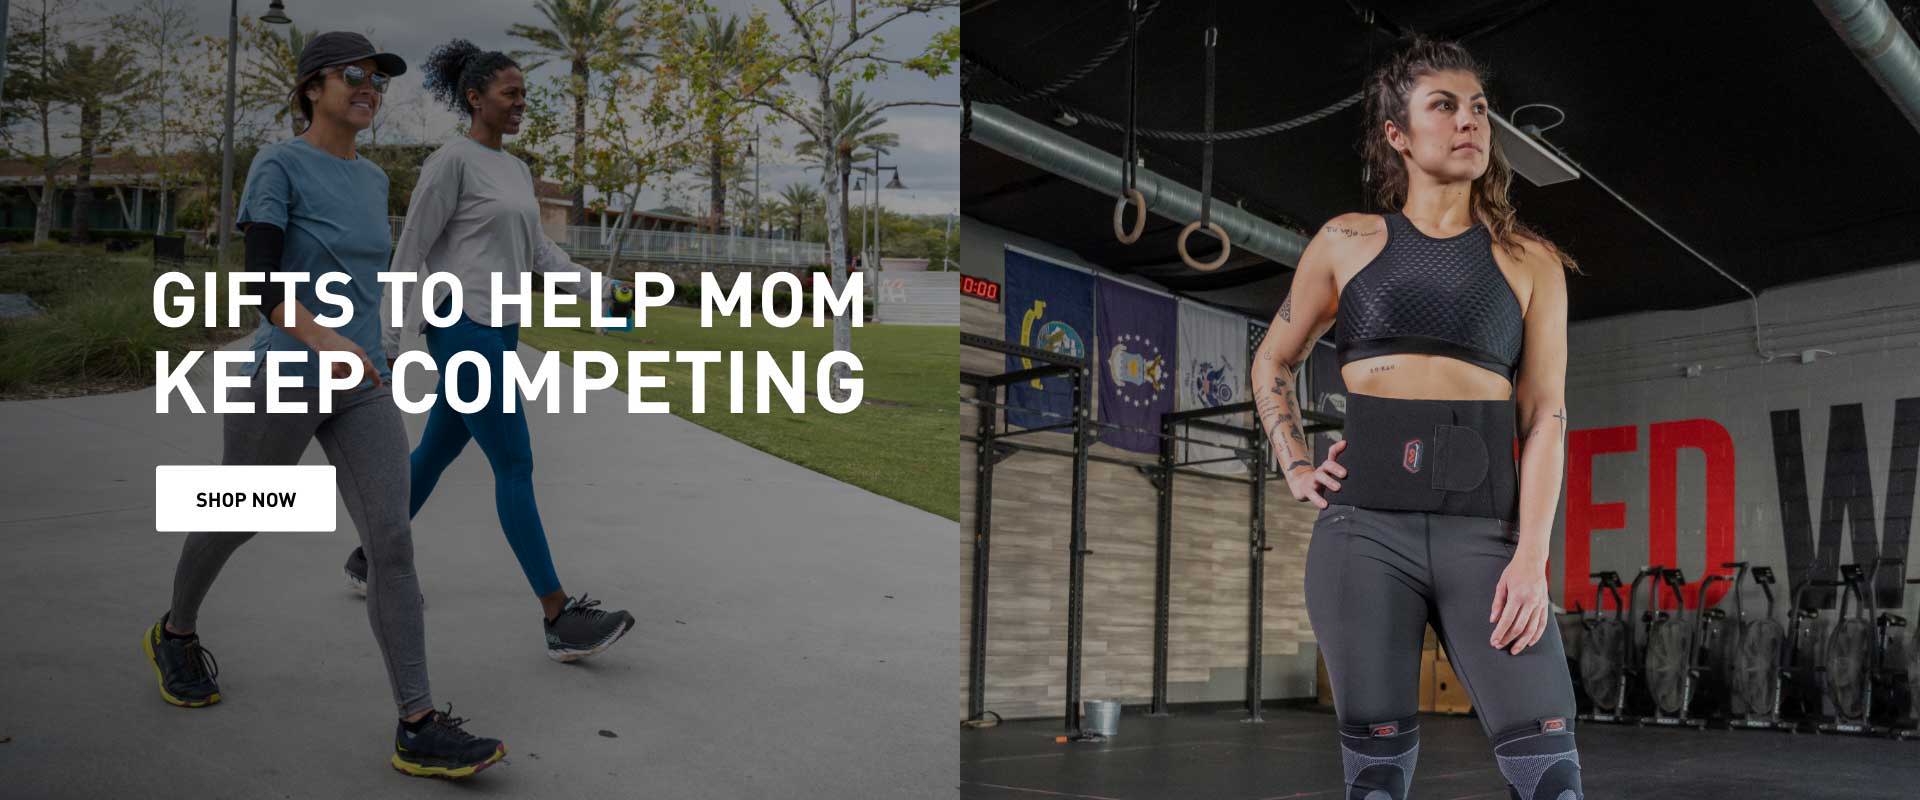 Gifts To Help Mom Keep Competing - Shop Now